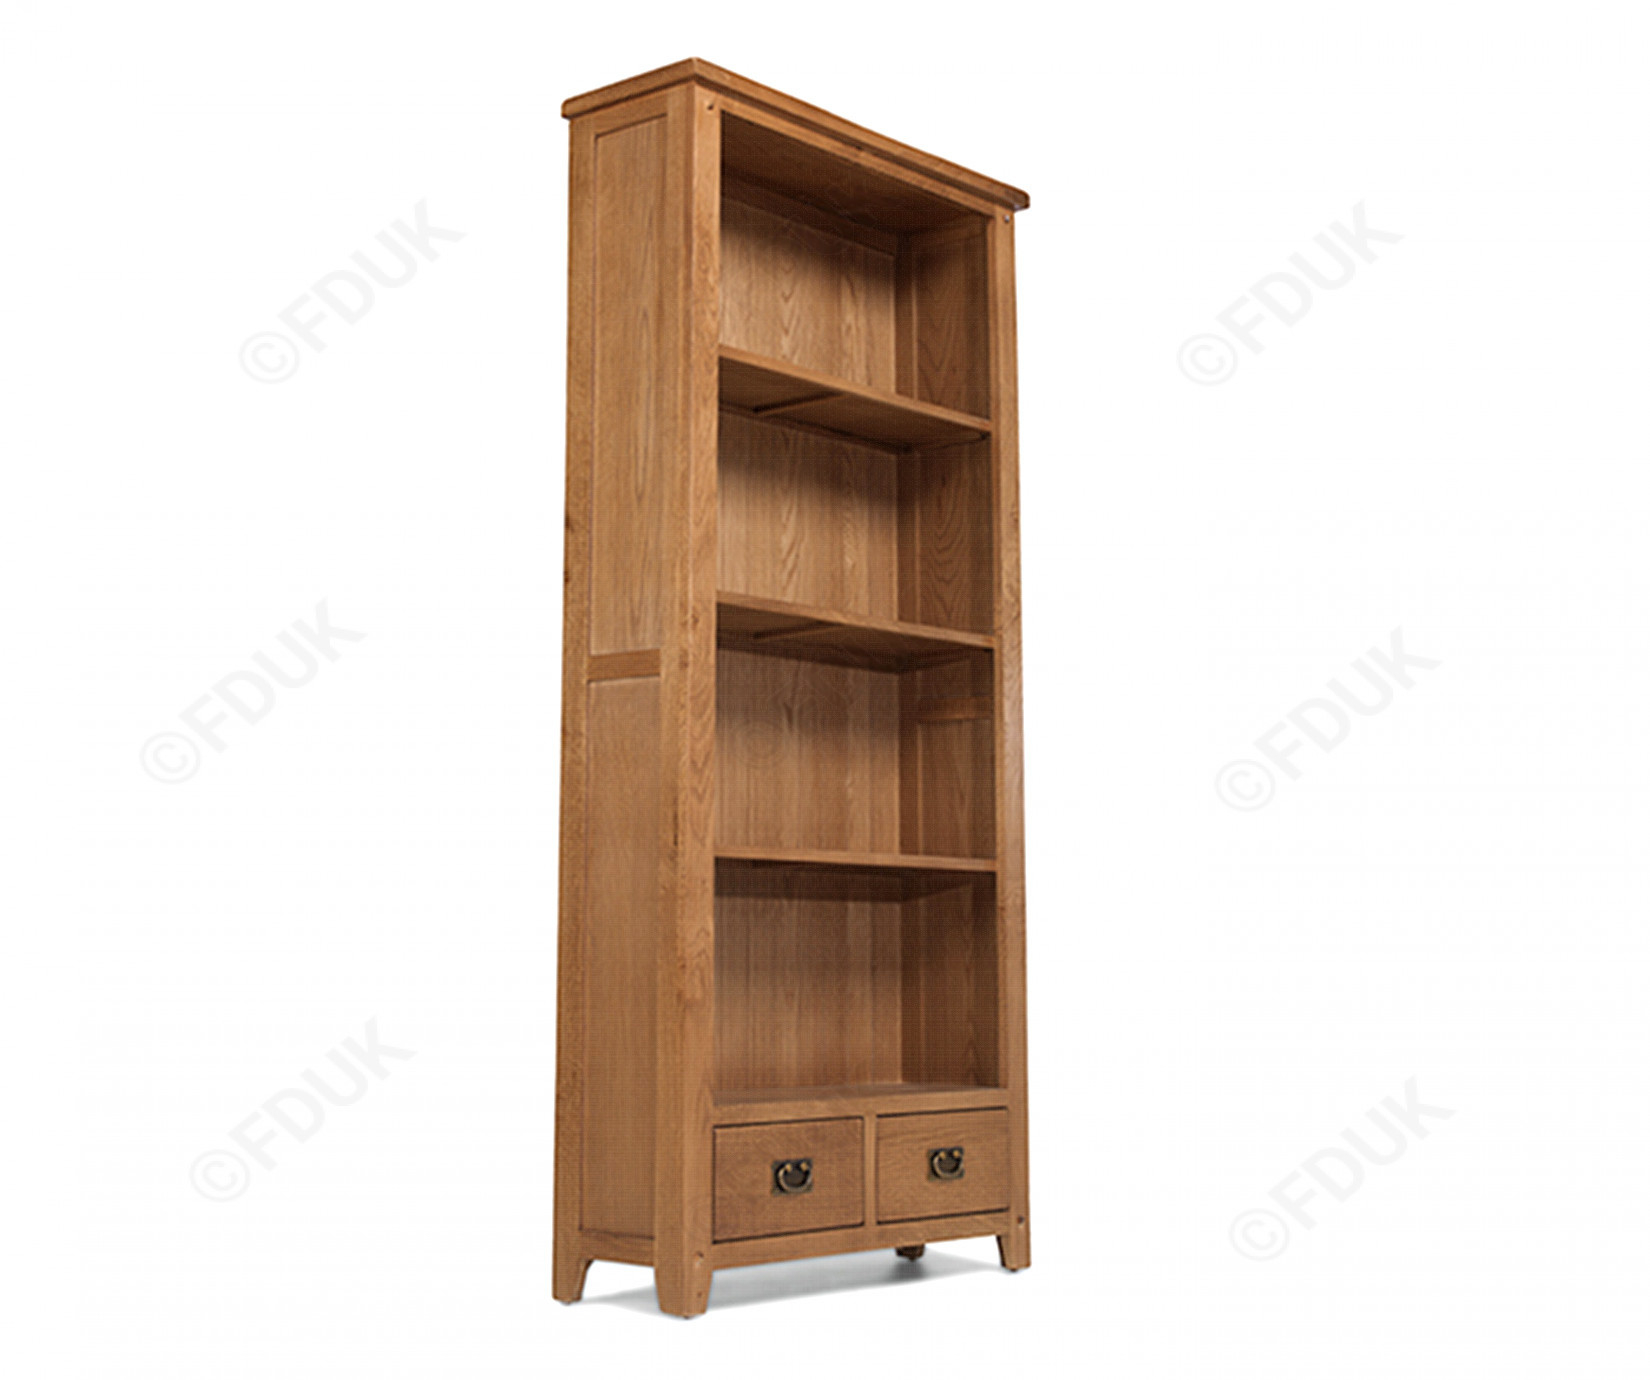 Heritance Cherboux Oak Tall Bookcase With Drawers in size 1650 X 1380